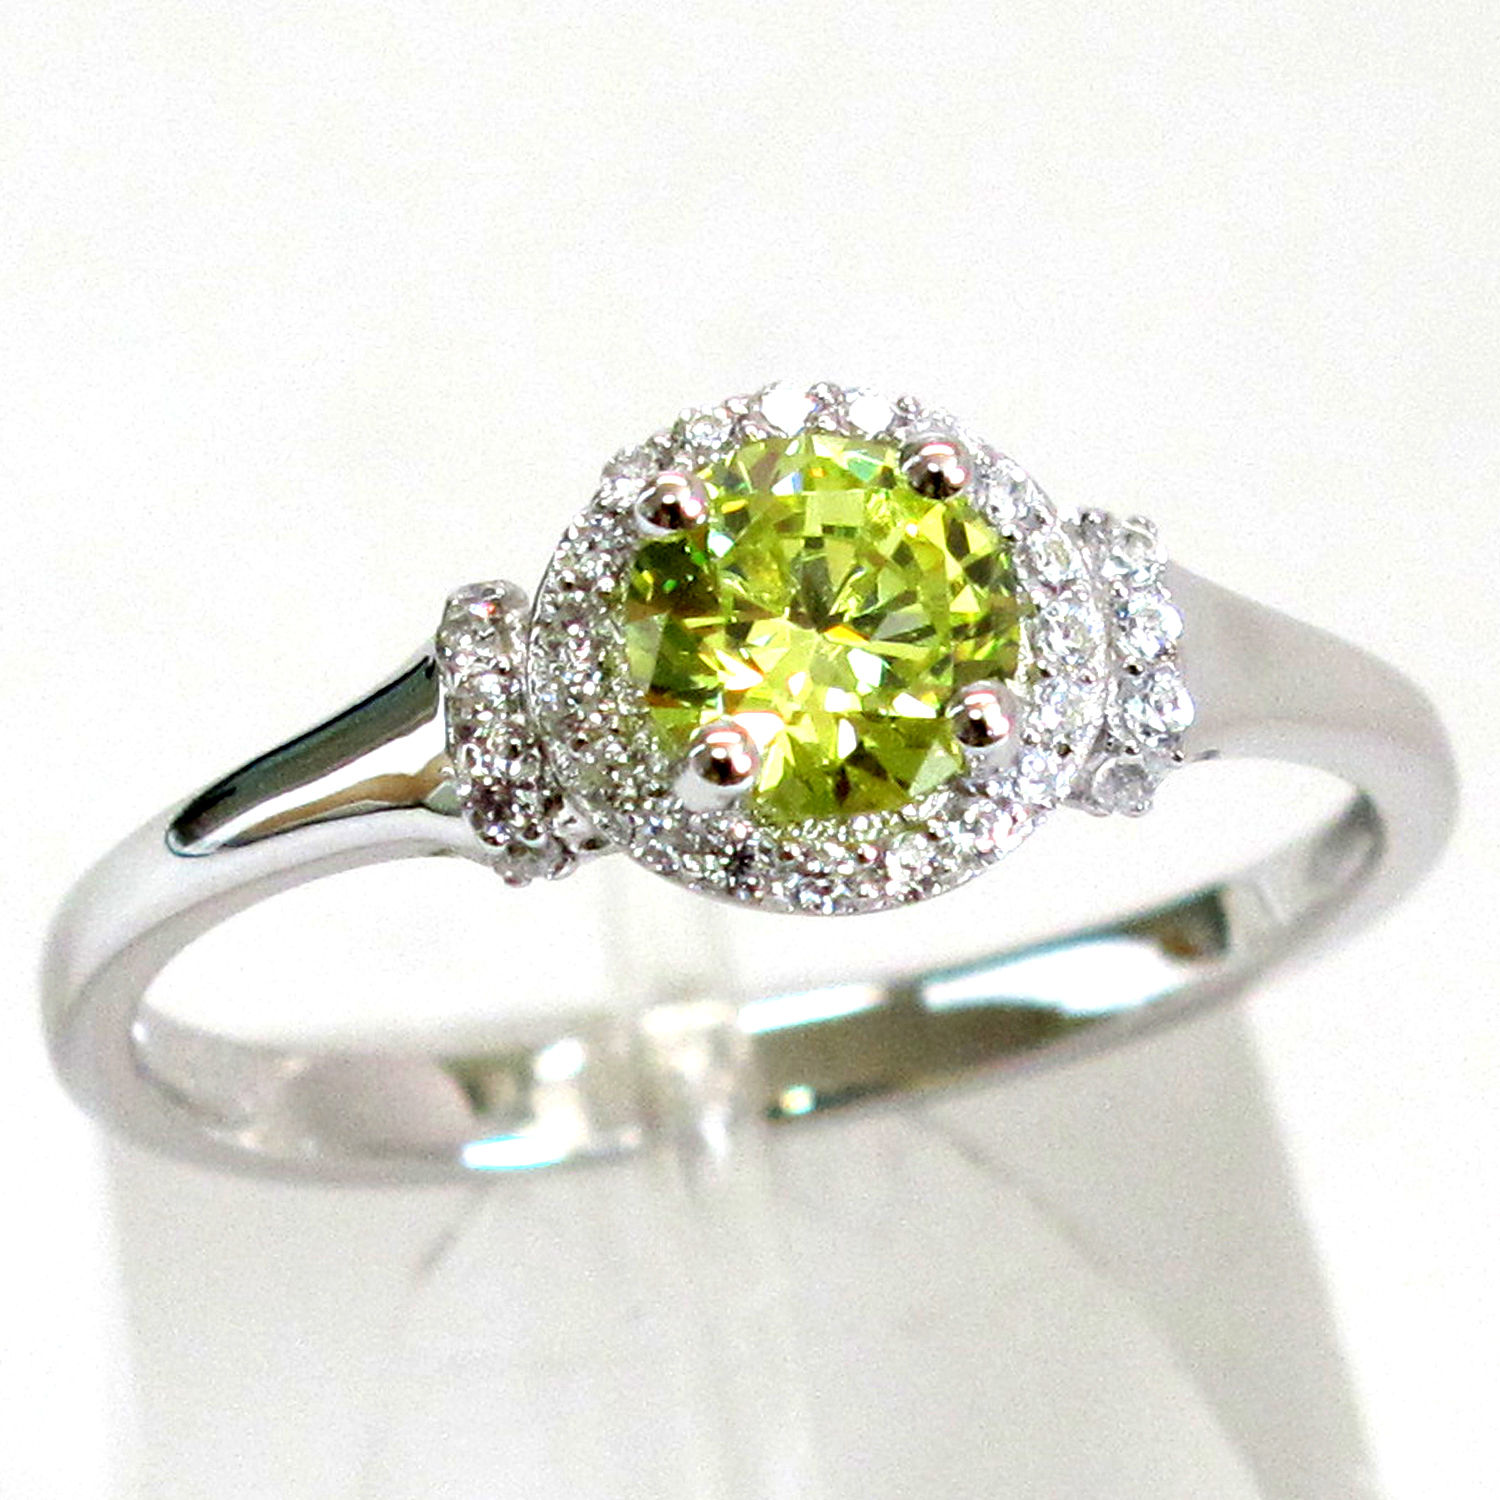 Peridot Gemstone Handmade 925 Sterling Silver Jewelry Ring Size 6 *Gemstone *Statement *Bridal *Wedding *Natural *Thin *Gift For Her